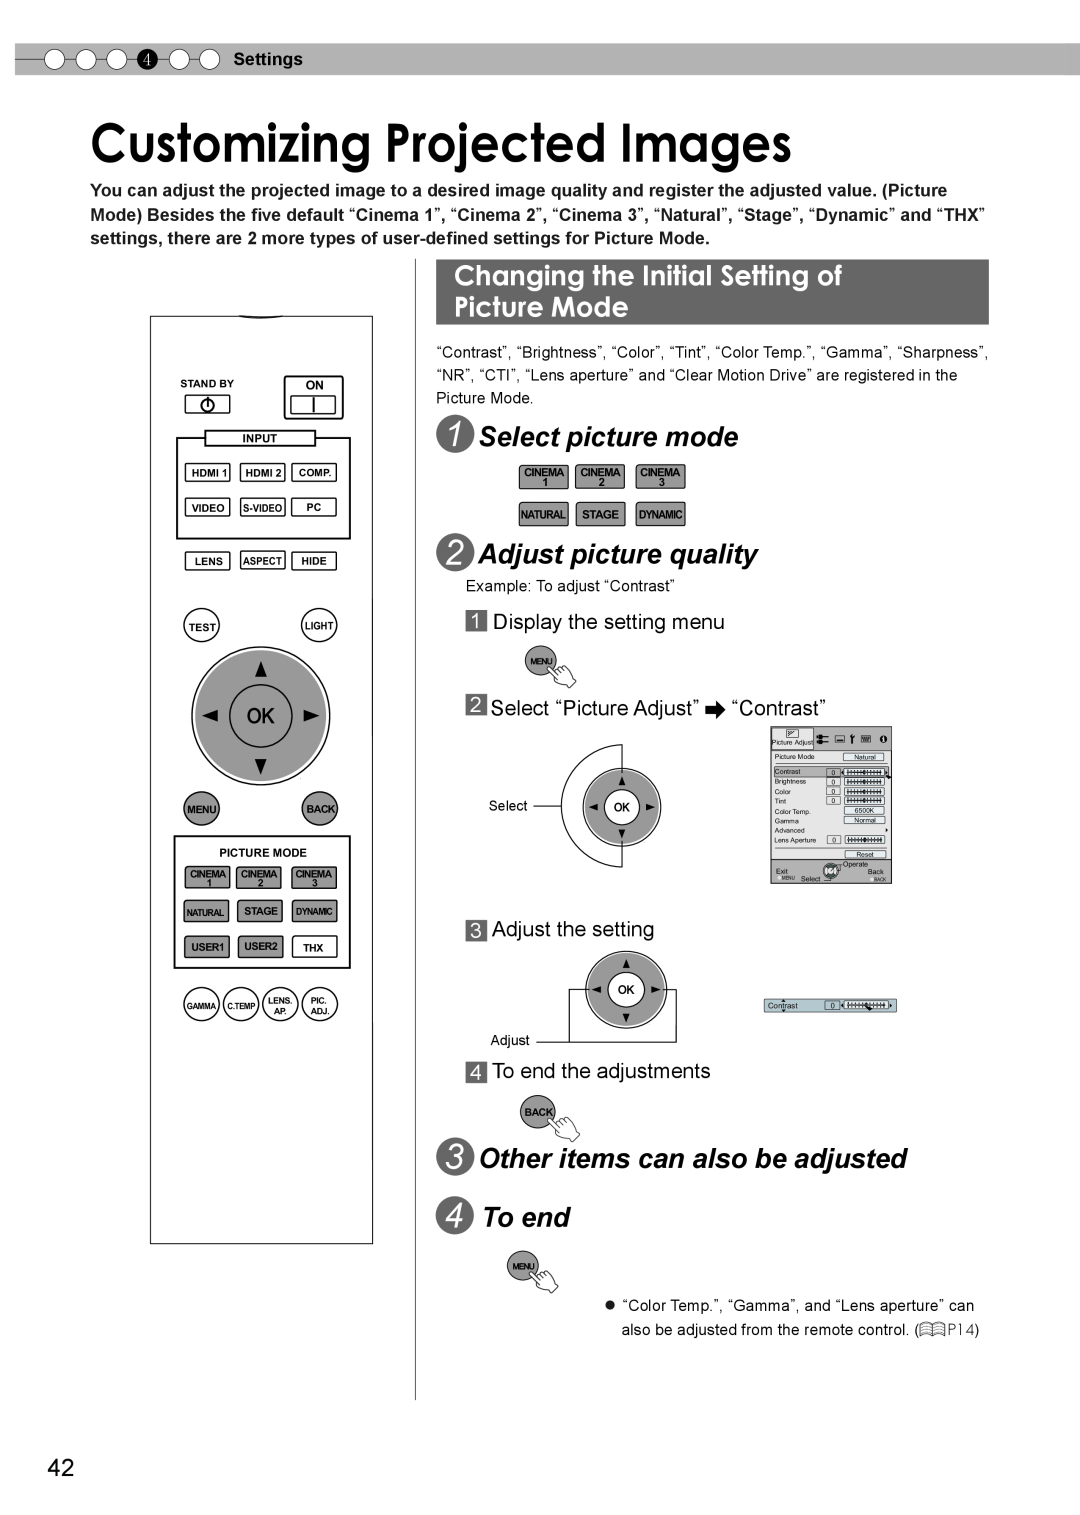 JVC PC007182399-1 Customizing Projected Images, Changing the Initial Setting of Picture Mode, Select picture mode, Adjust 